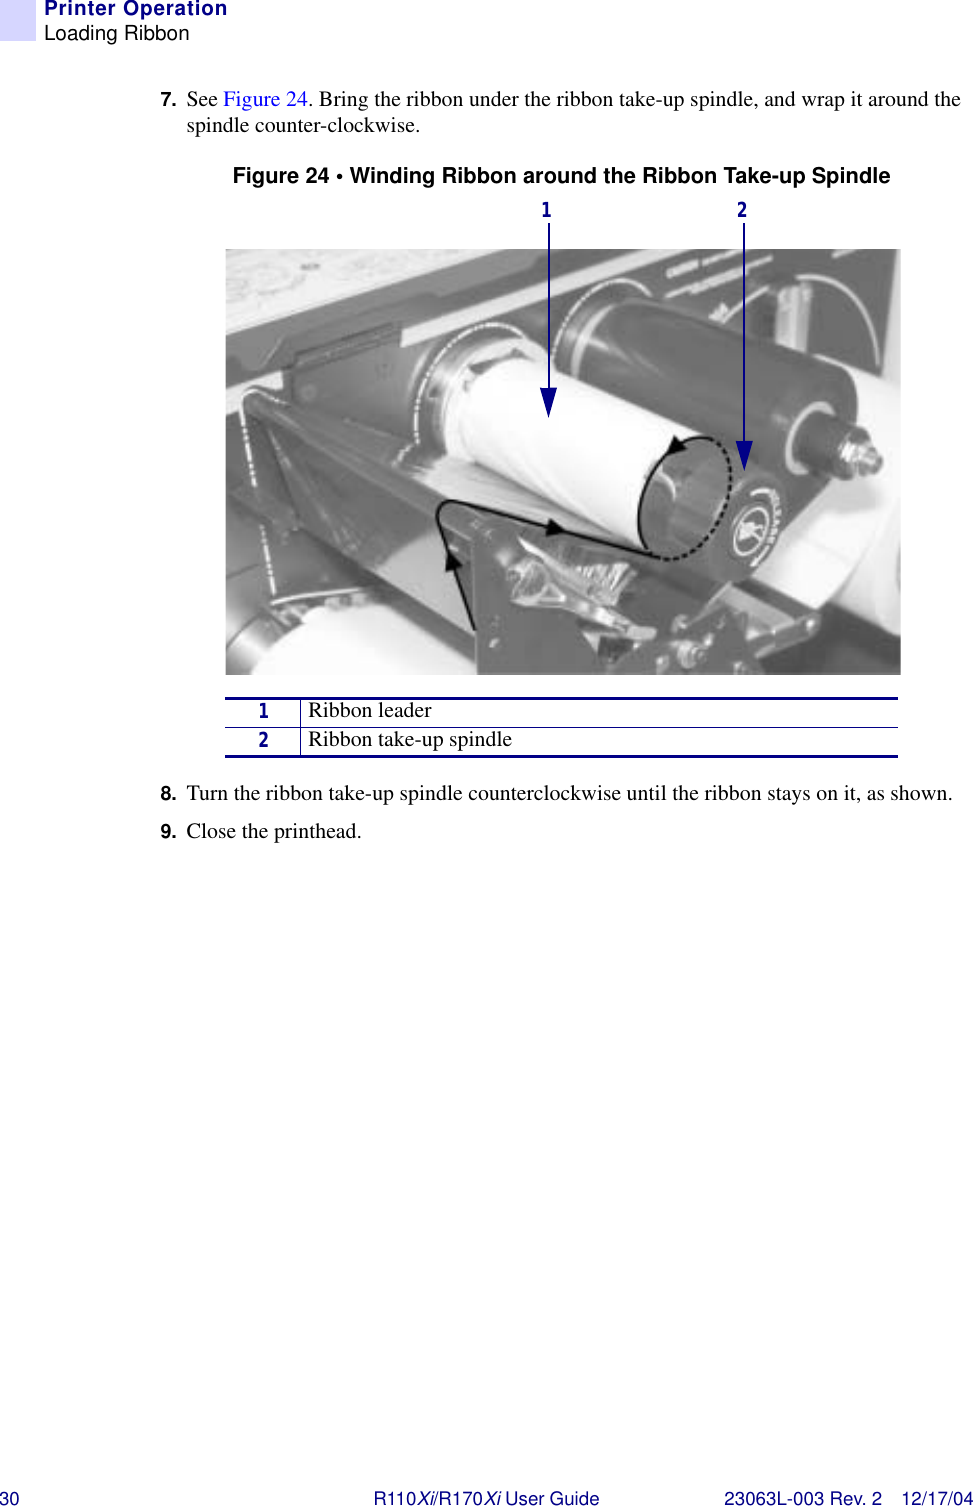 30 R110Xi/R170Xi User Guide 23063L-003 Rev. 2 12/17/04Printer OperationLoading Ribbon7. See Figure 24. Bring the ribbon under the ribbon take-up spindle, and wrap it around the spindle counter-clockwise.Figure 24 • Winding Ribbon around the Ribbon Take-up Spindle8. Turn the ribbon take-up spindle counterclockwise until the ribbon stays on it, as shown.9. Close the printhead.1Ribbon leader2Ribbon take-up spindle1 2